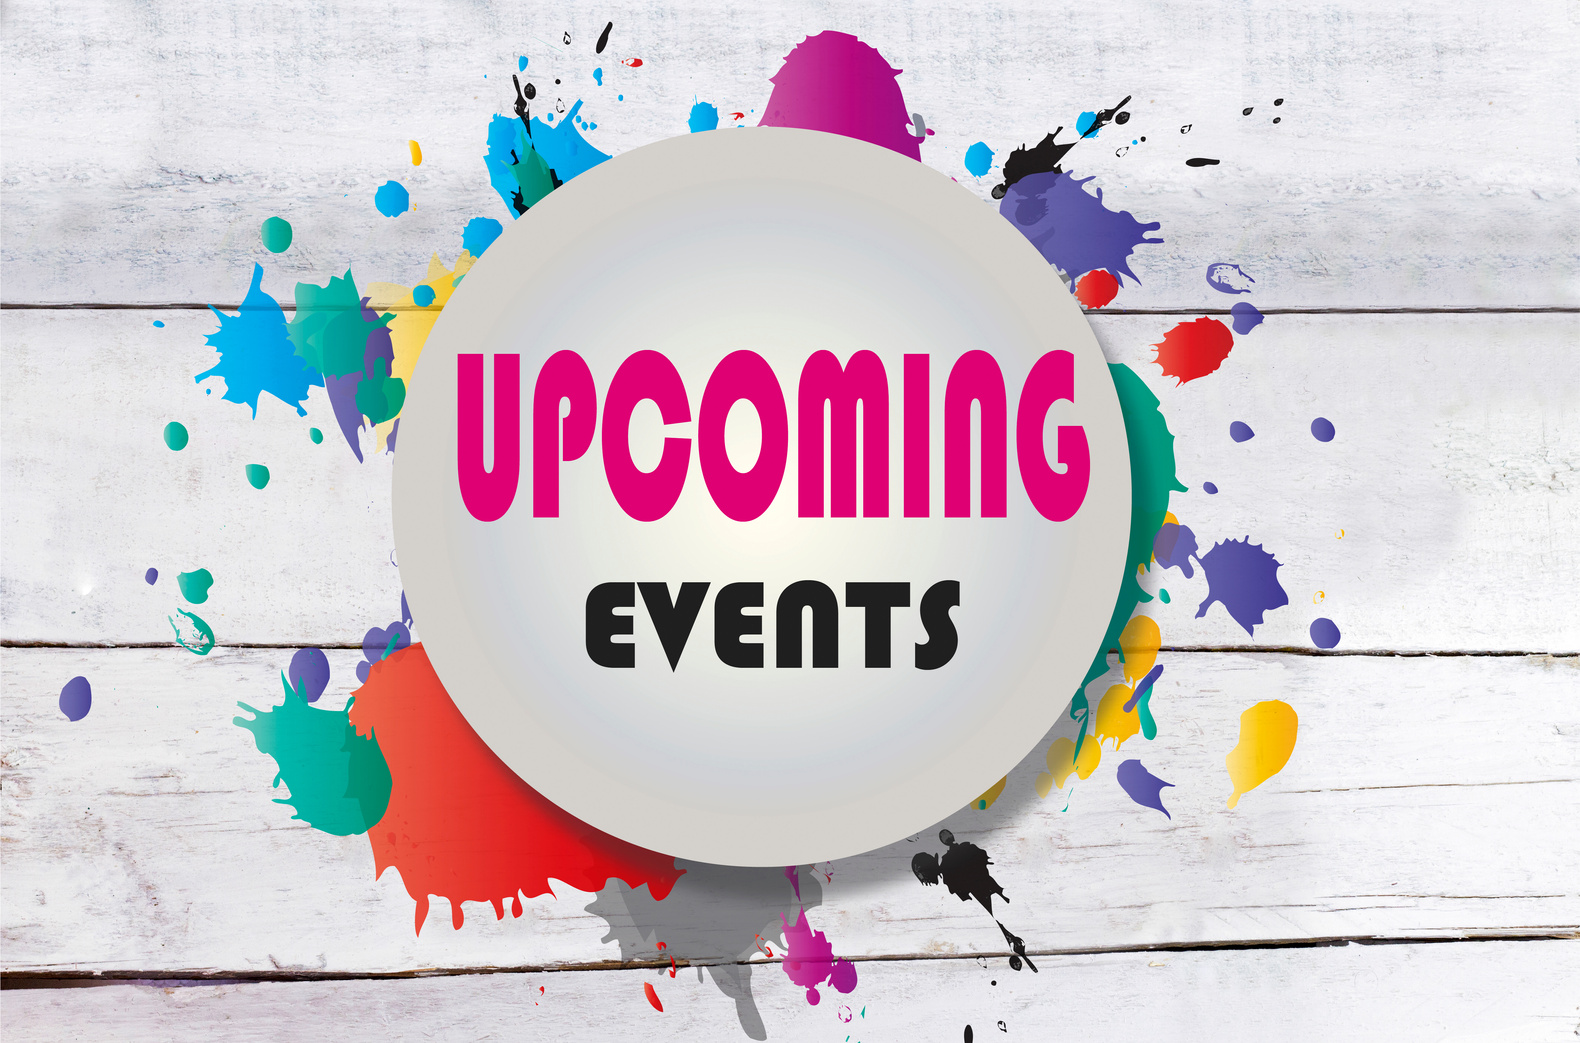 upcoming events on wooden background